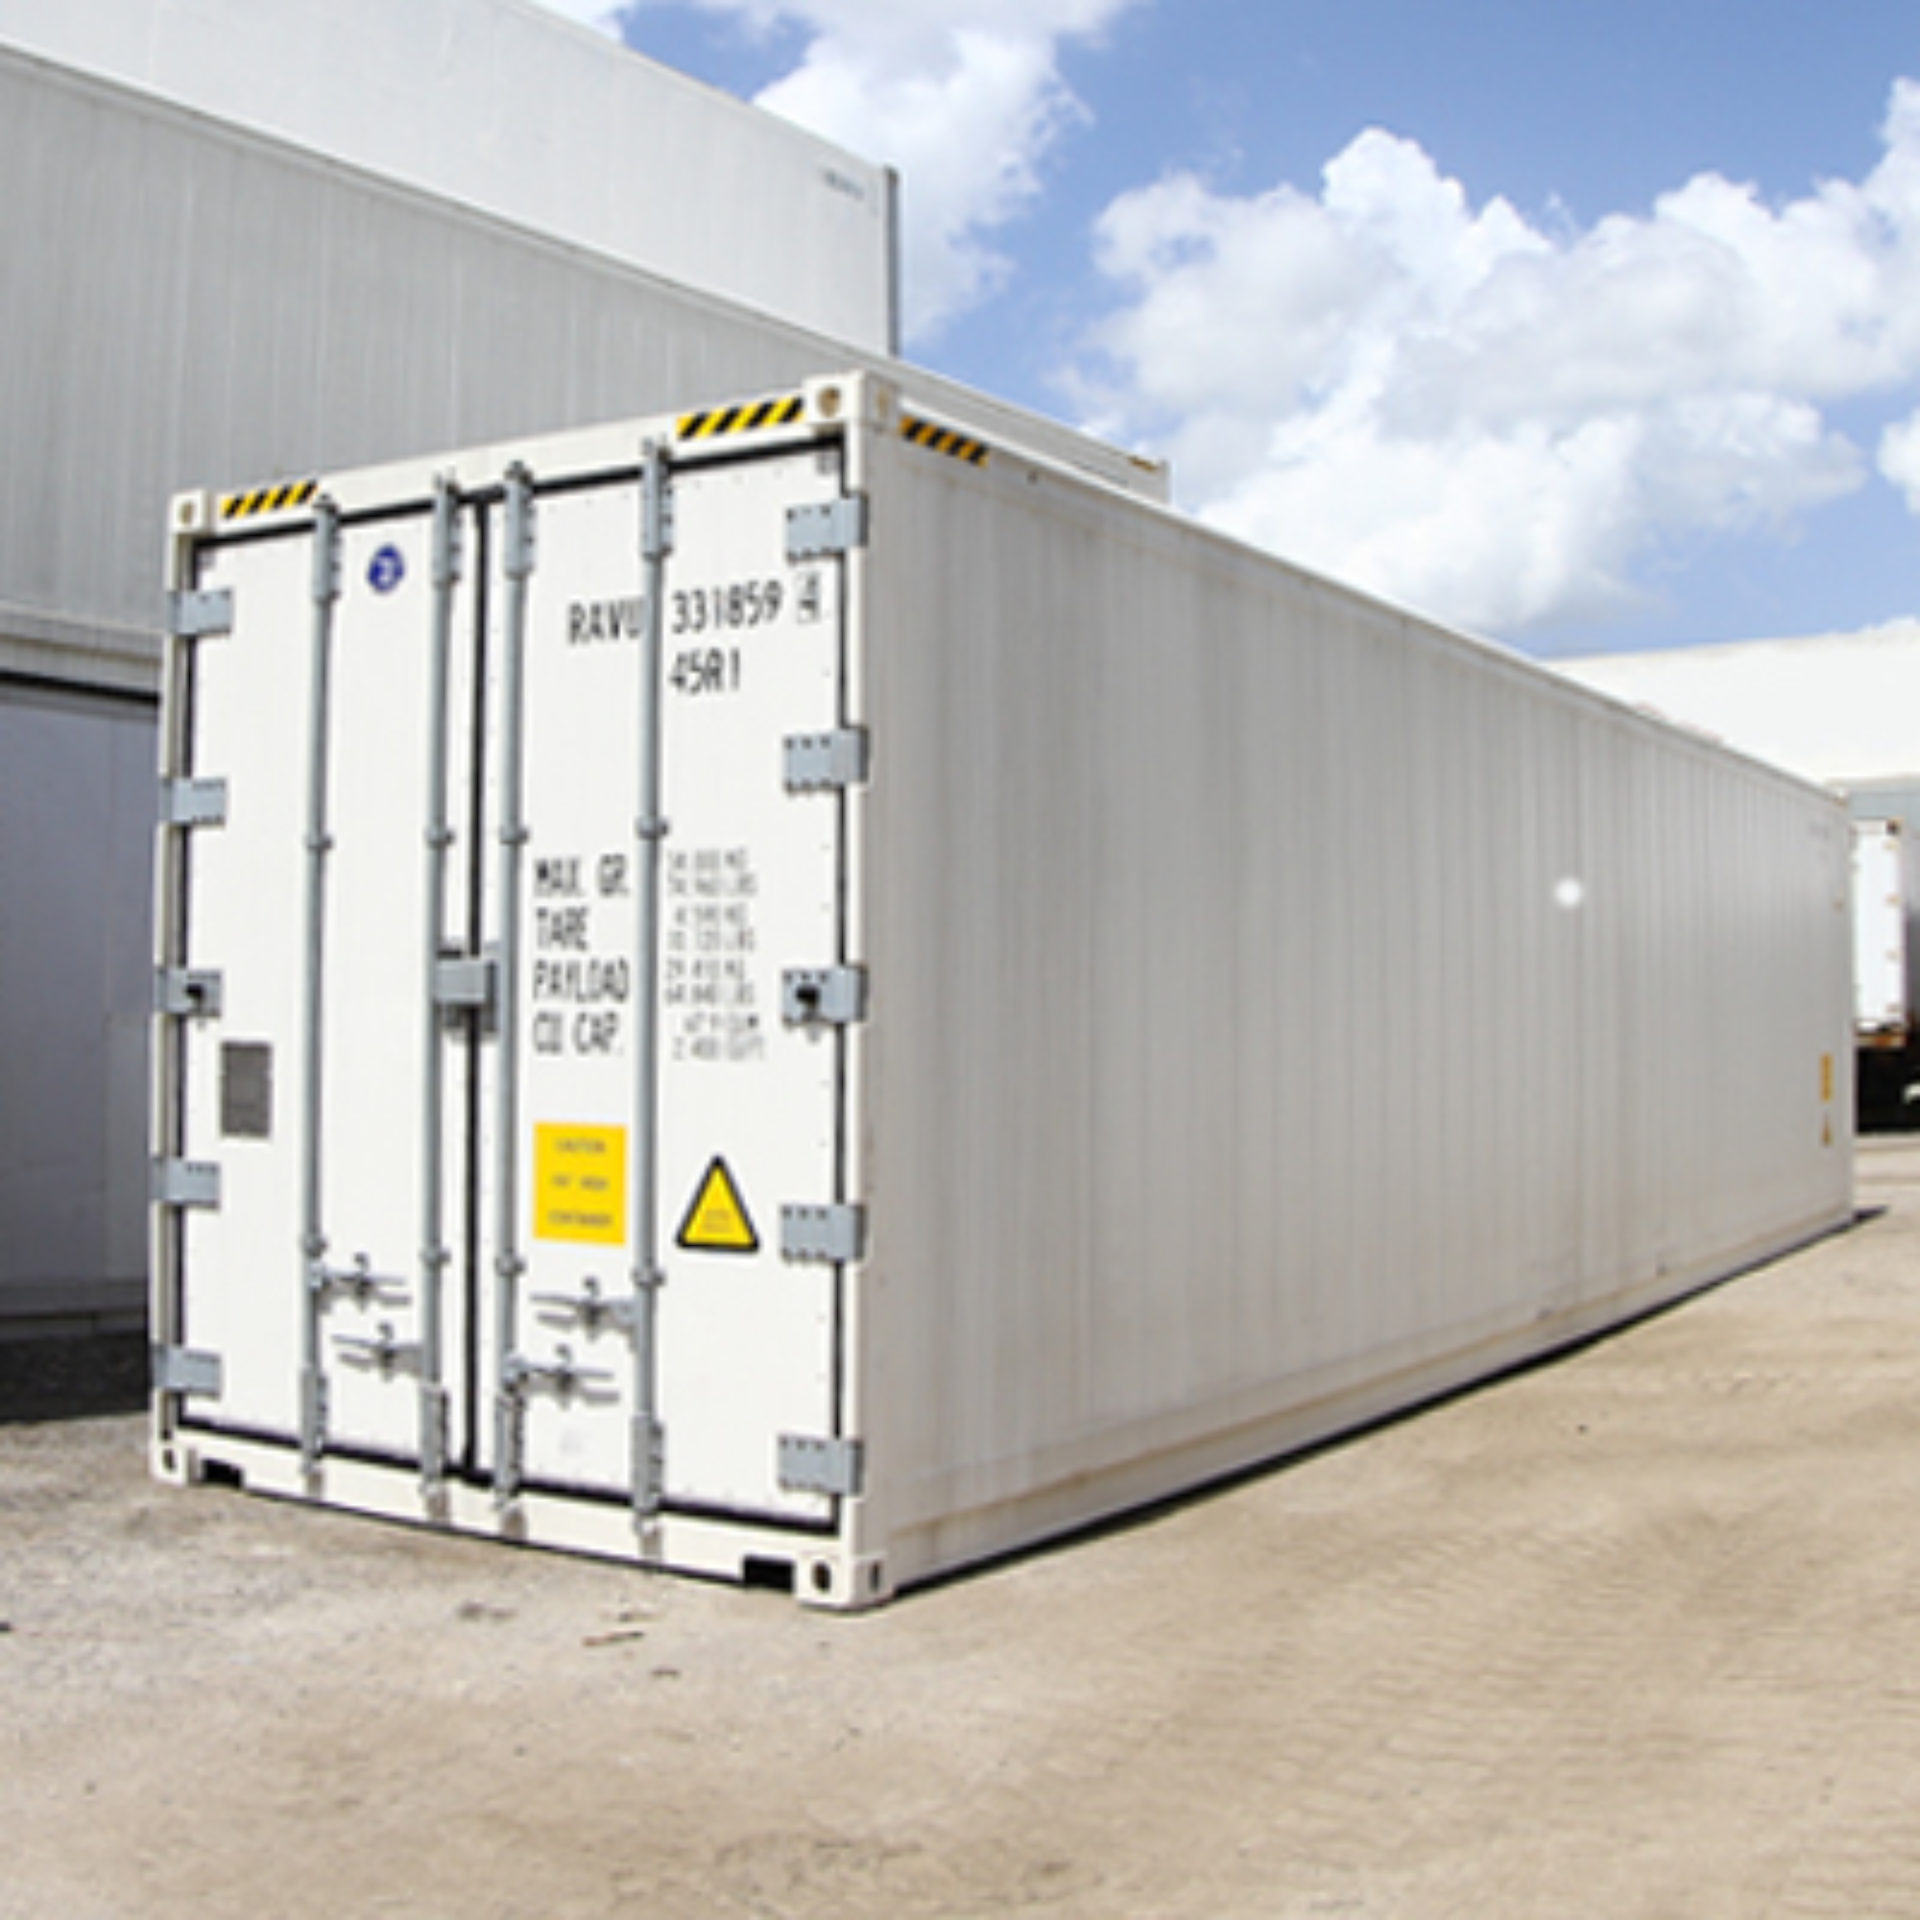 10' Refrigerated Container (SUPER FREEZER) - RAVA Group Container Services